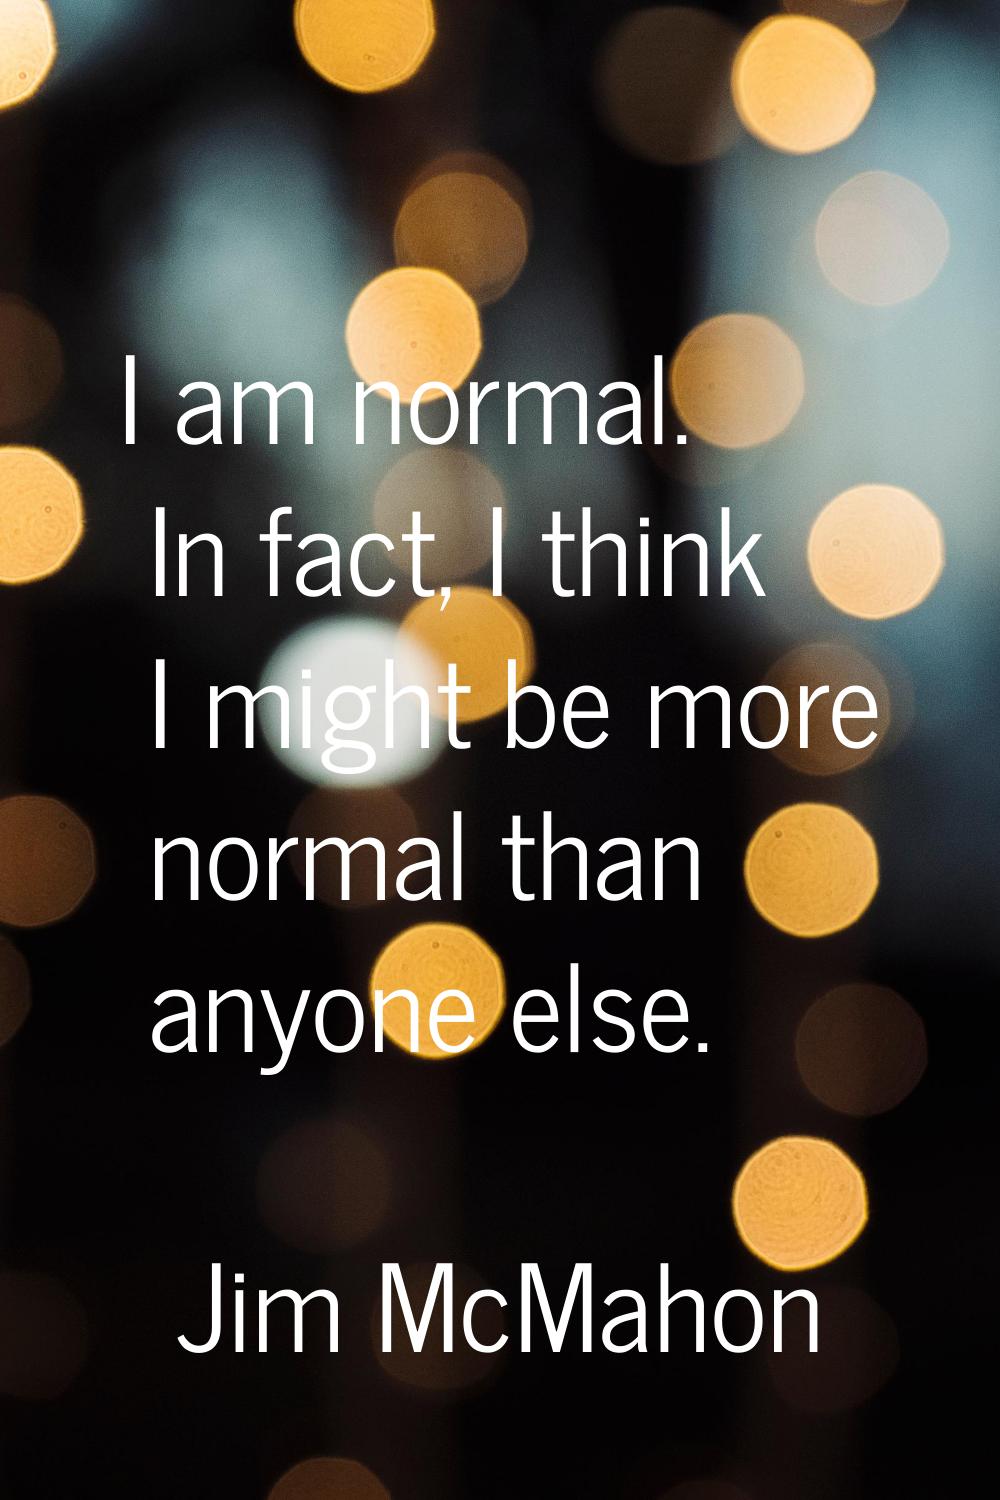 I am normal. In fact, I think I might be more normal than anyone else.